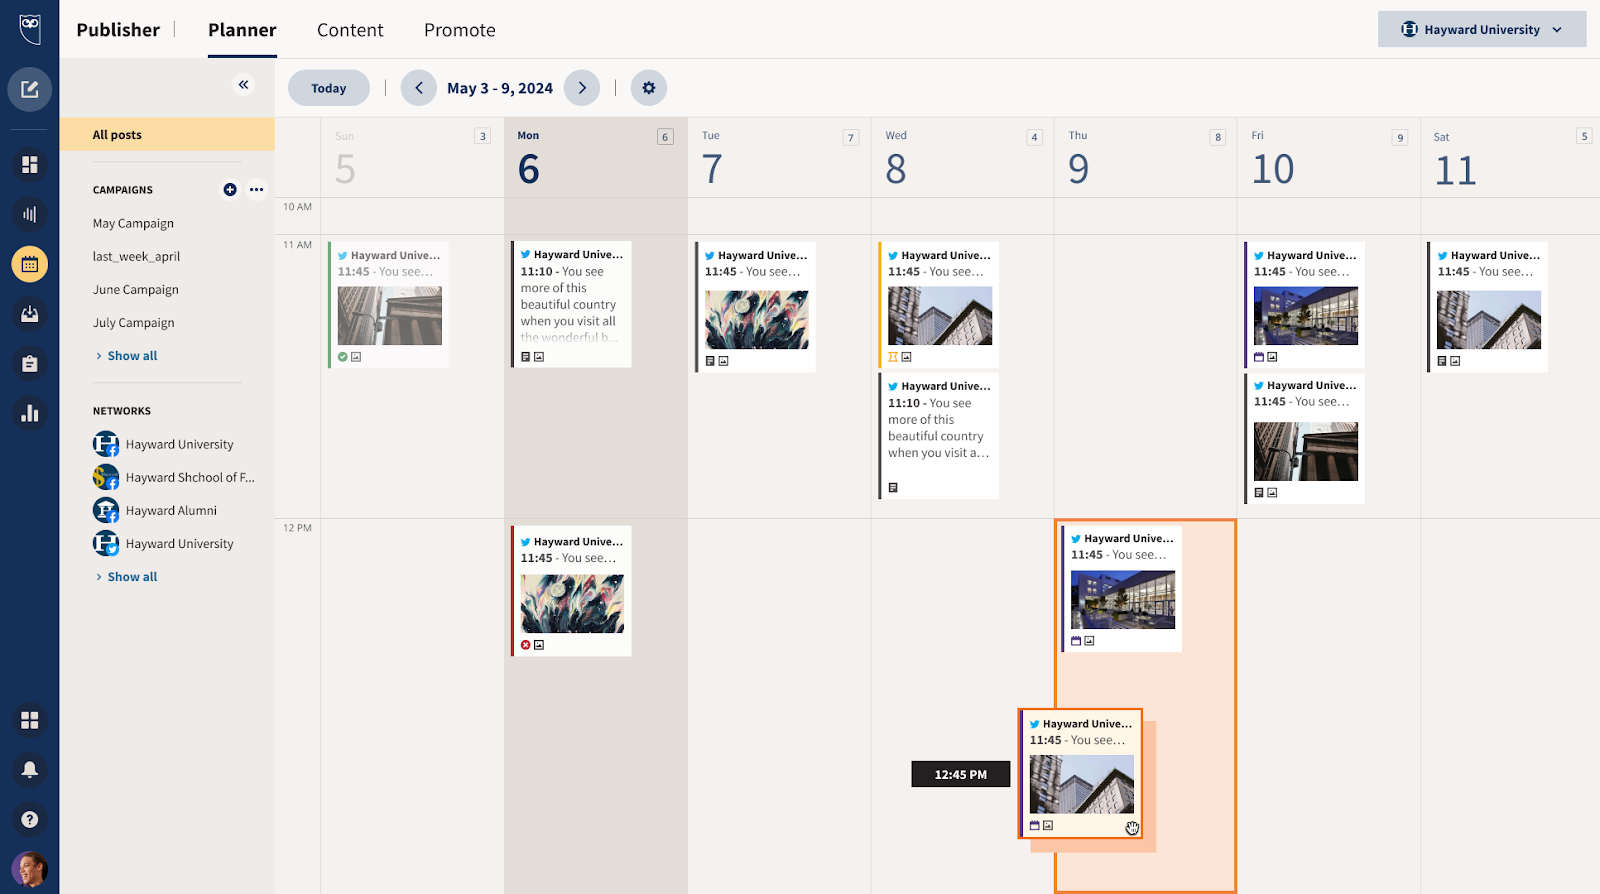 Hootsuite Software - Scheduling: Plan social content as a team with an intuitive, shared planner that features collaborative post drafts and built-in approval workflows.